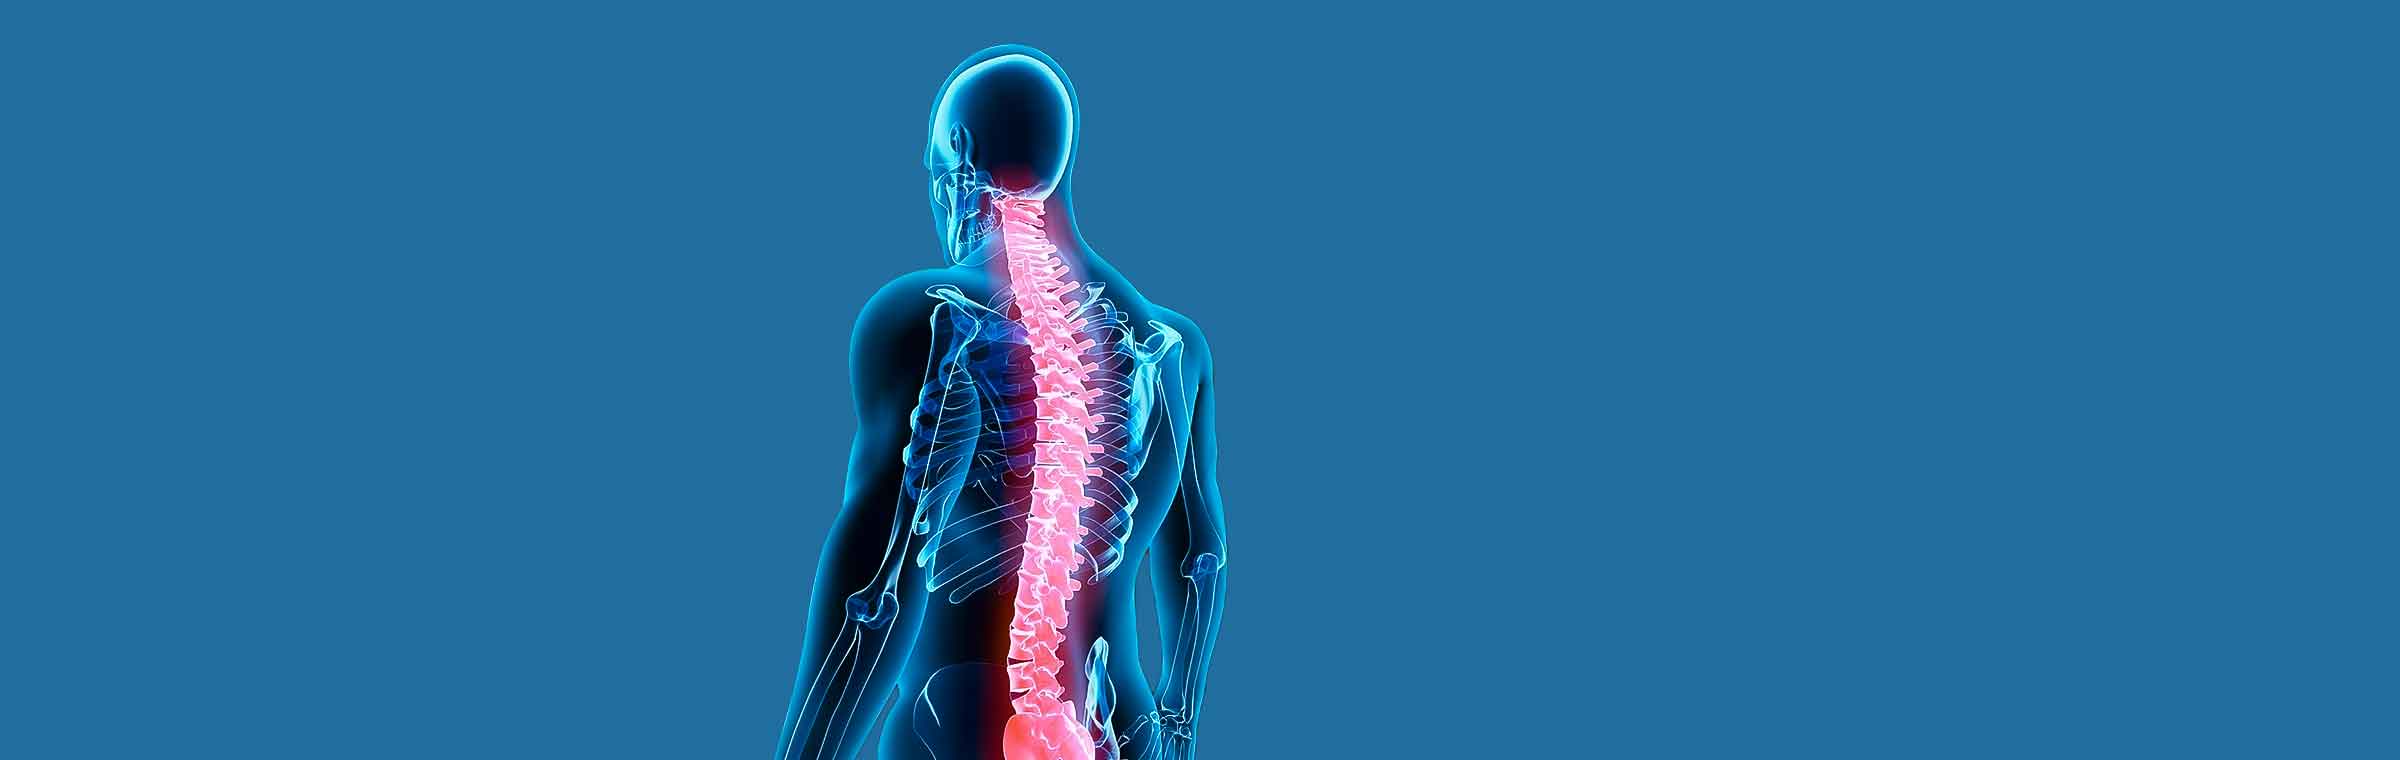 back pain neck pain chiropractor 